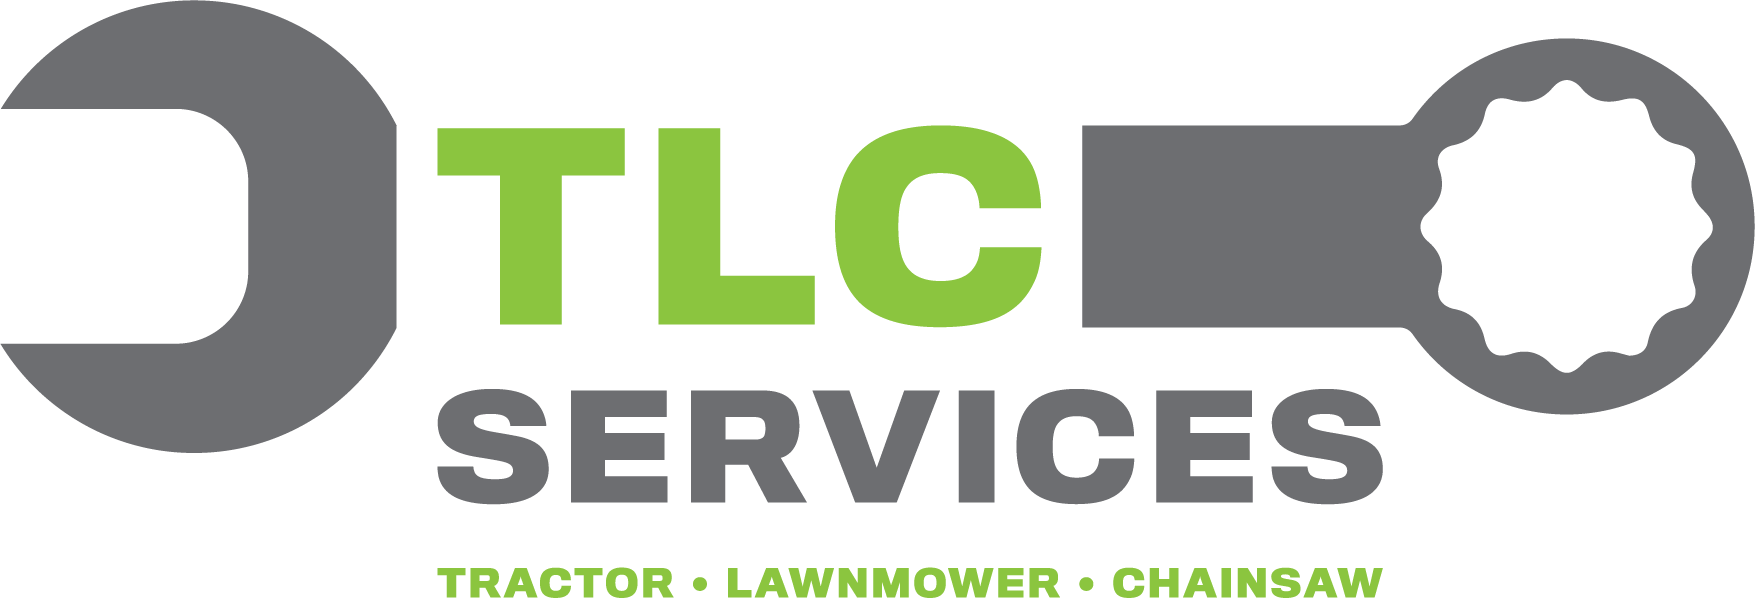 TLC Tractor Lawnmower & Chainsaw Services